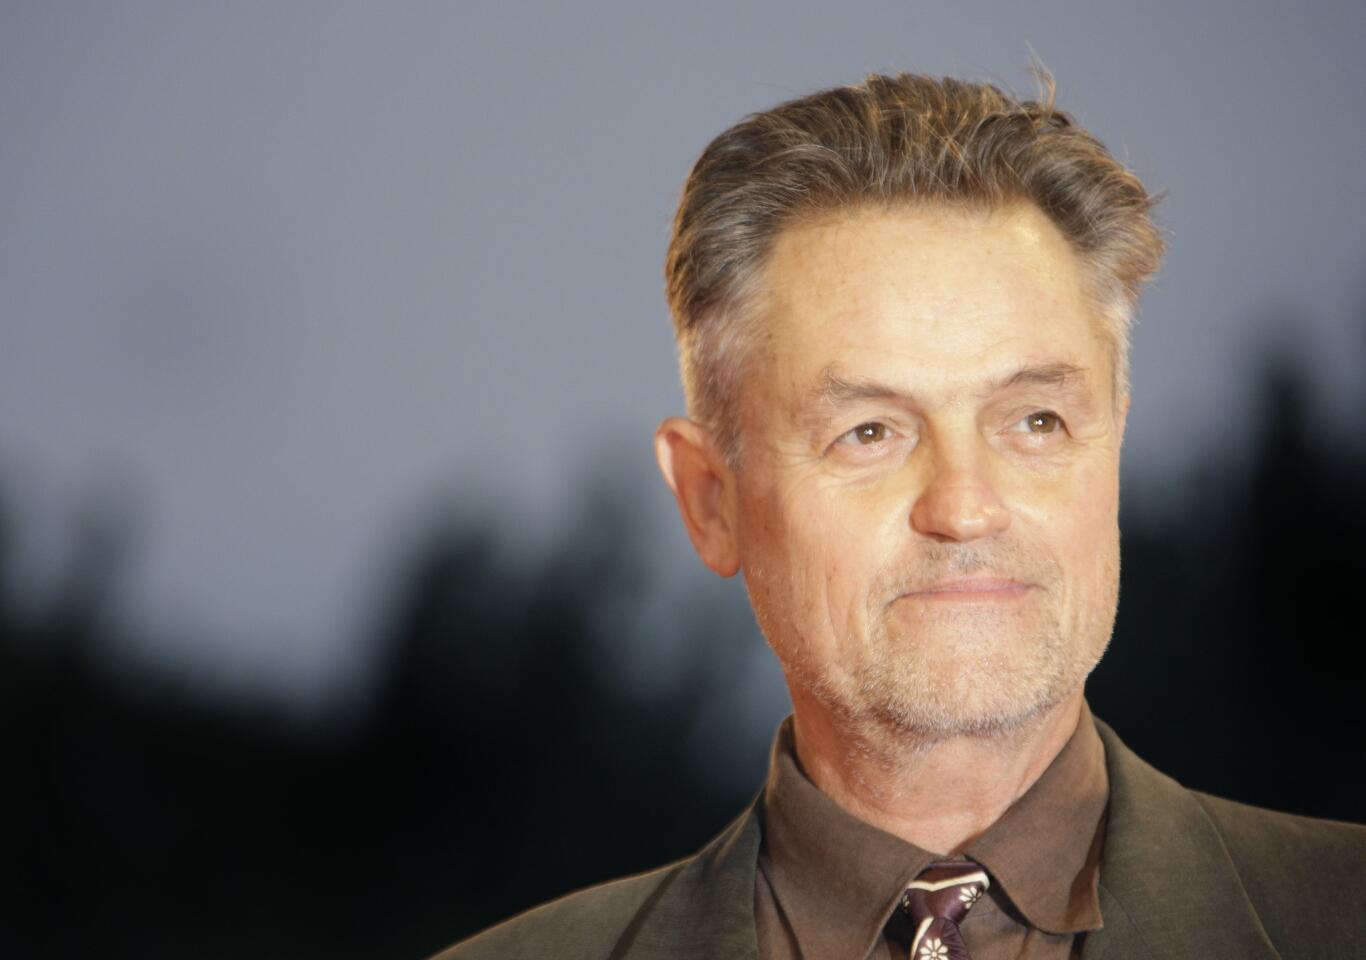 Best known for directing the Oscar-winning "The Silence of the Lambs" and "Philadelphia," Jonathan Demme died April 26, 2017, from complications from esophageal cancer. He was 73. Read more.